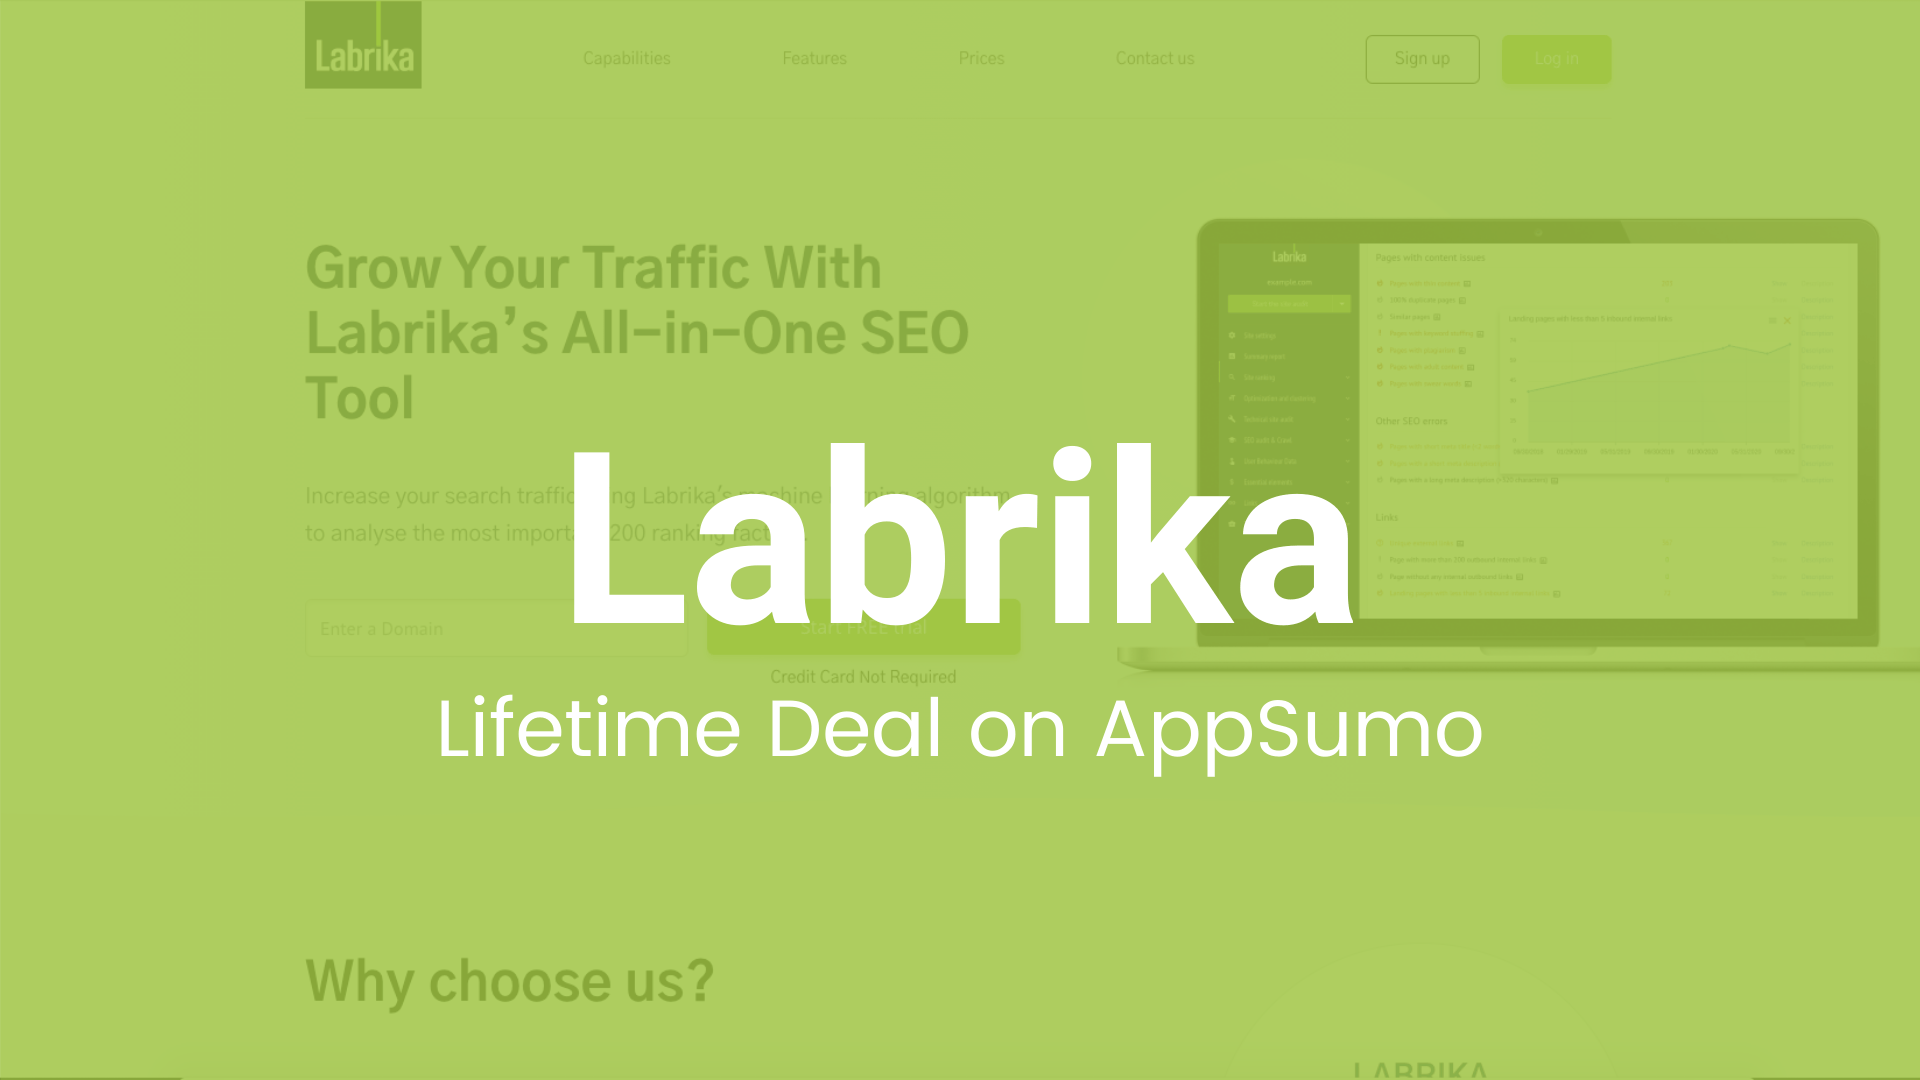 Labrika: All-in-One SEO Tool